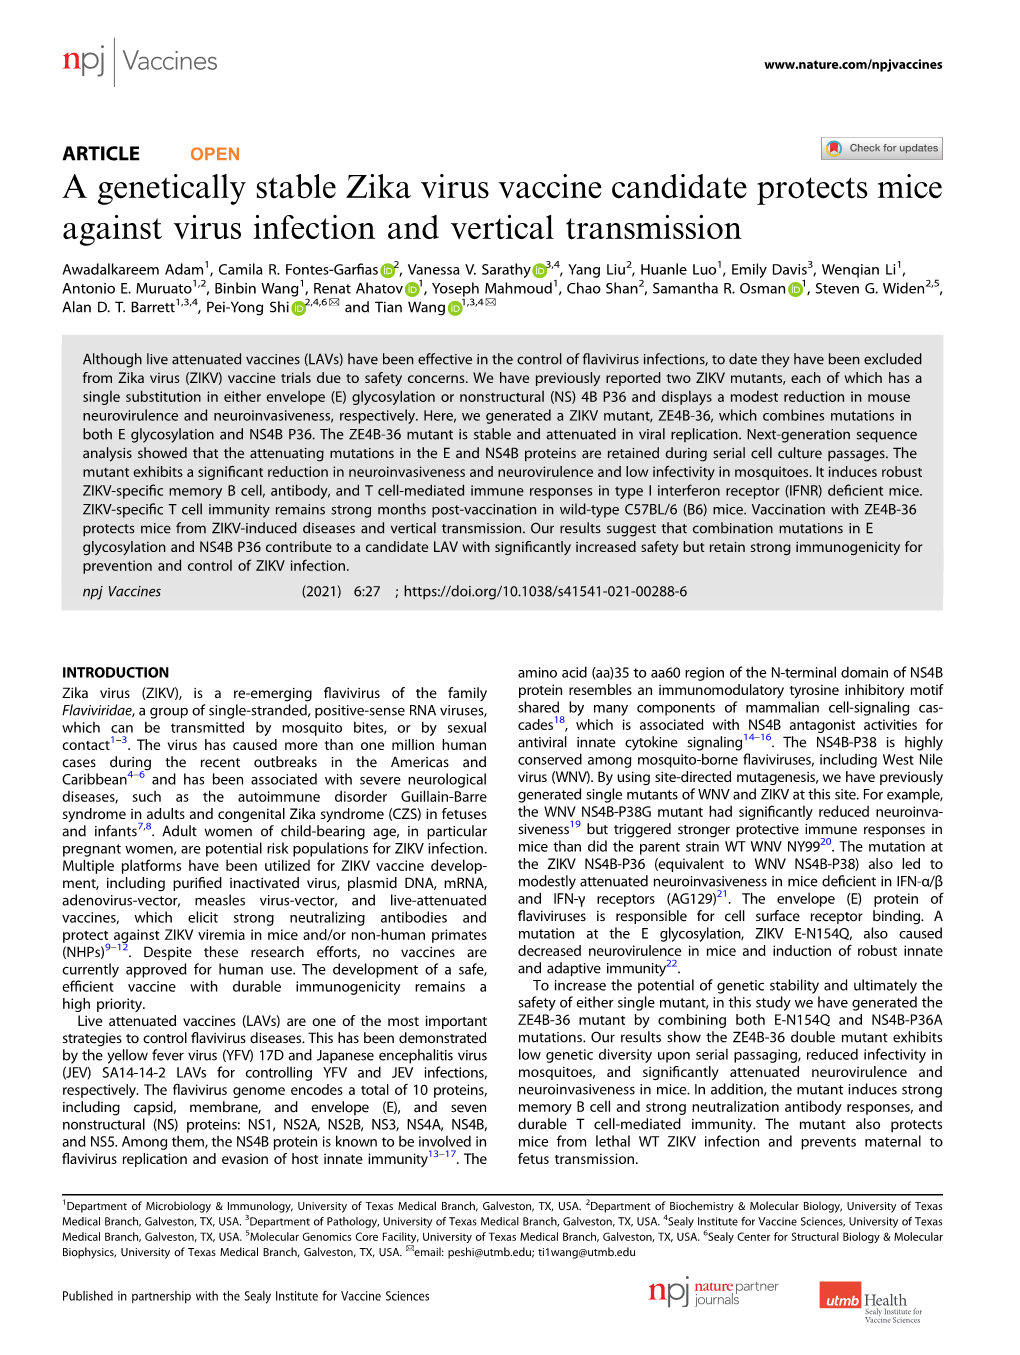 A Genetically Stable Zika Virus Vaccine Candidate Protects Mice Against Virus Infection and Vertical Transmission